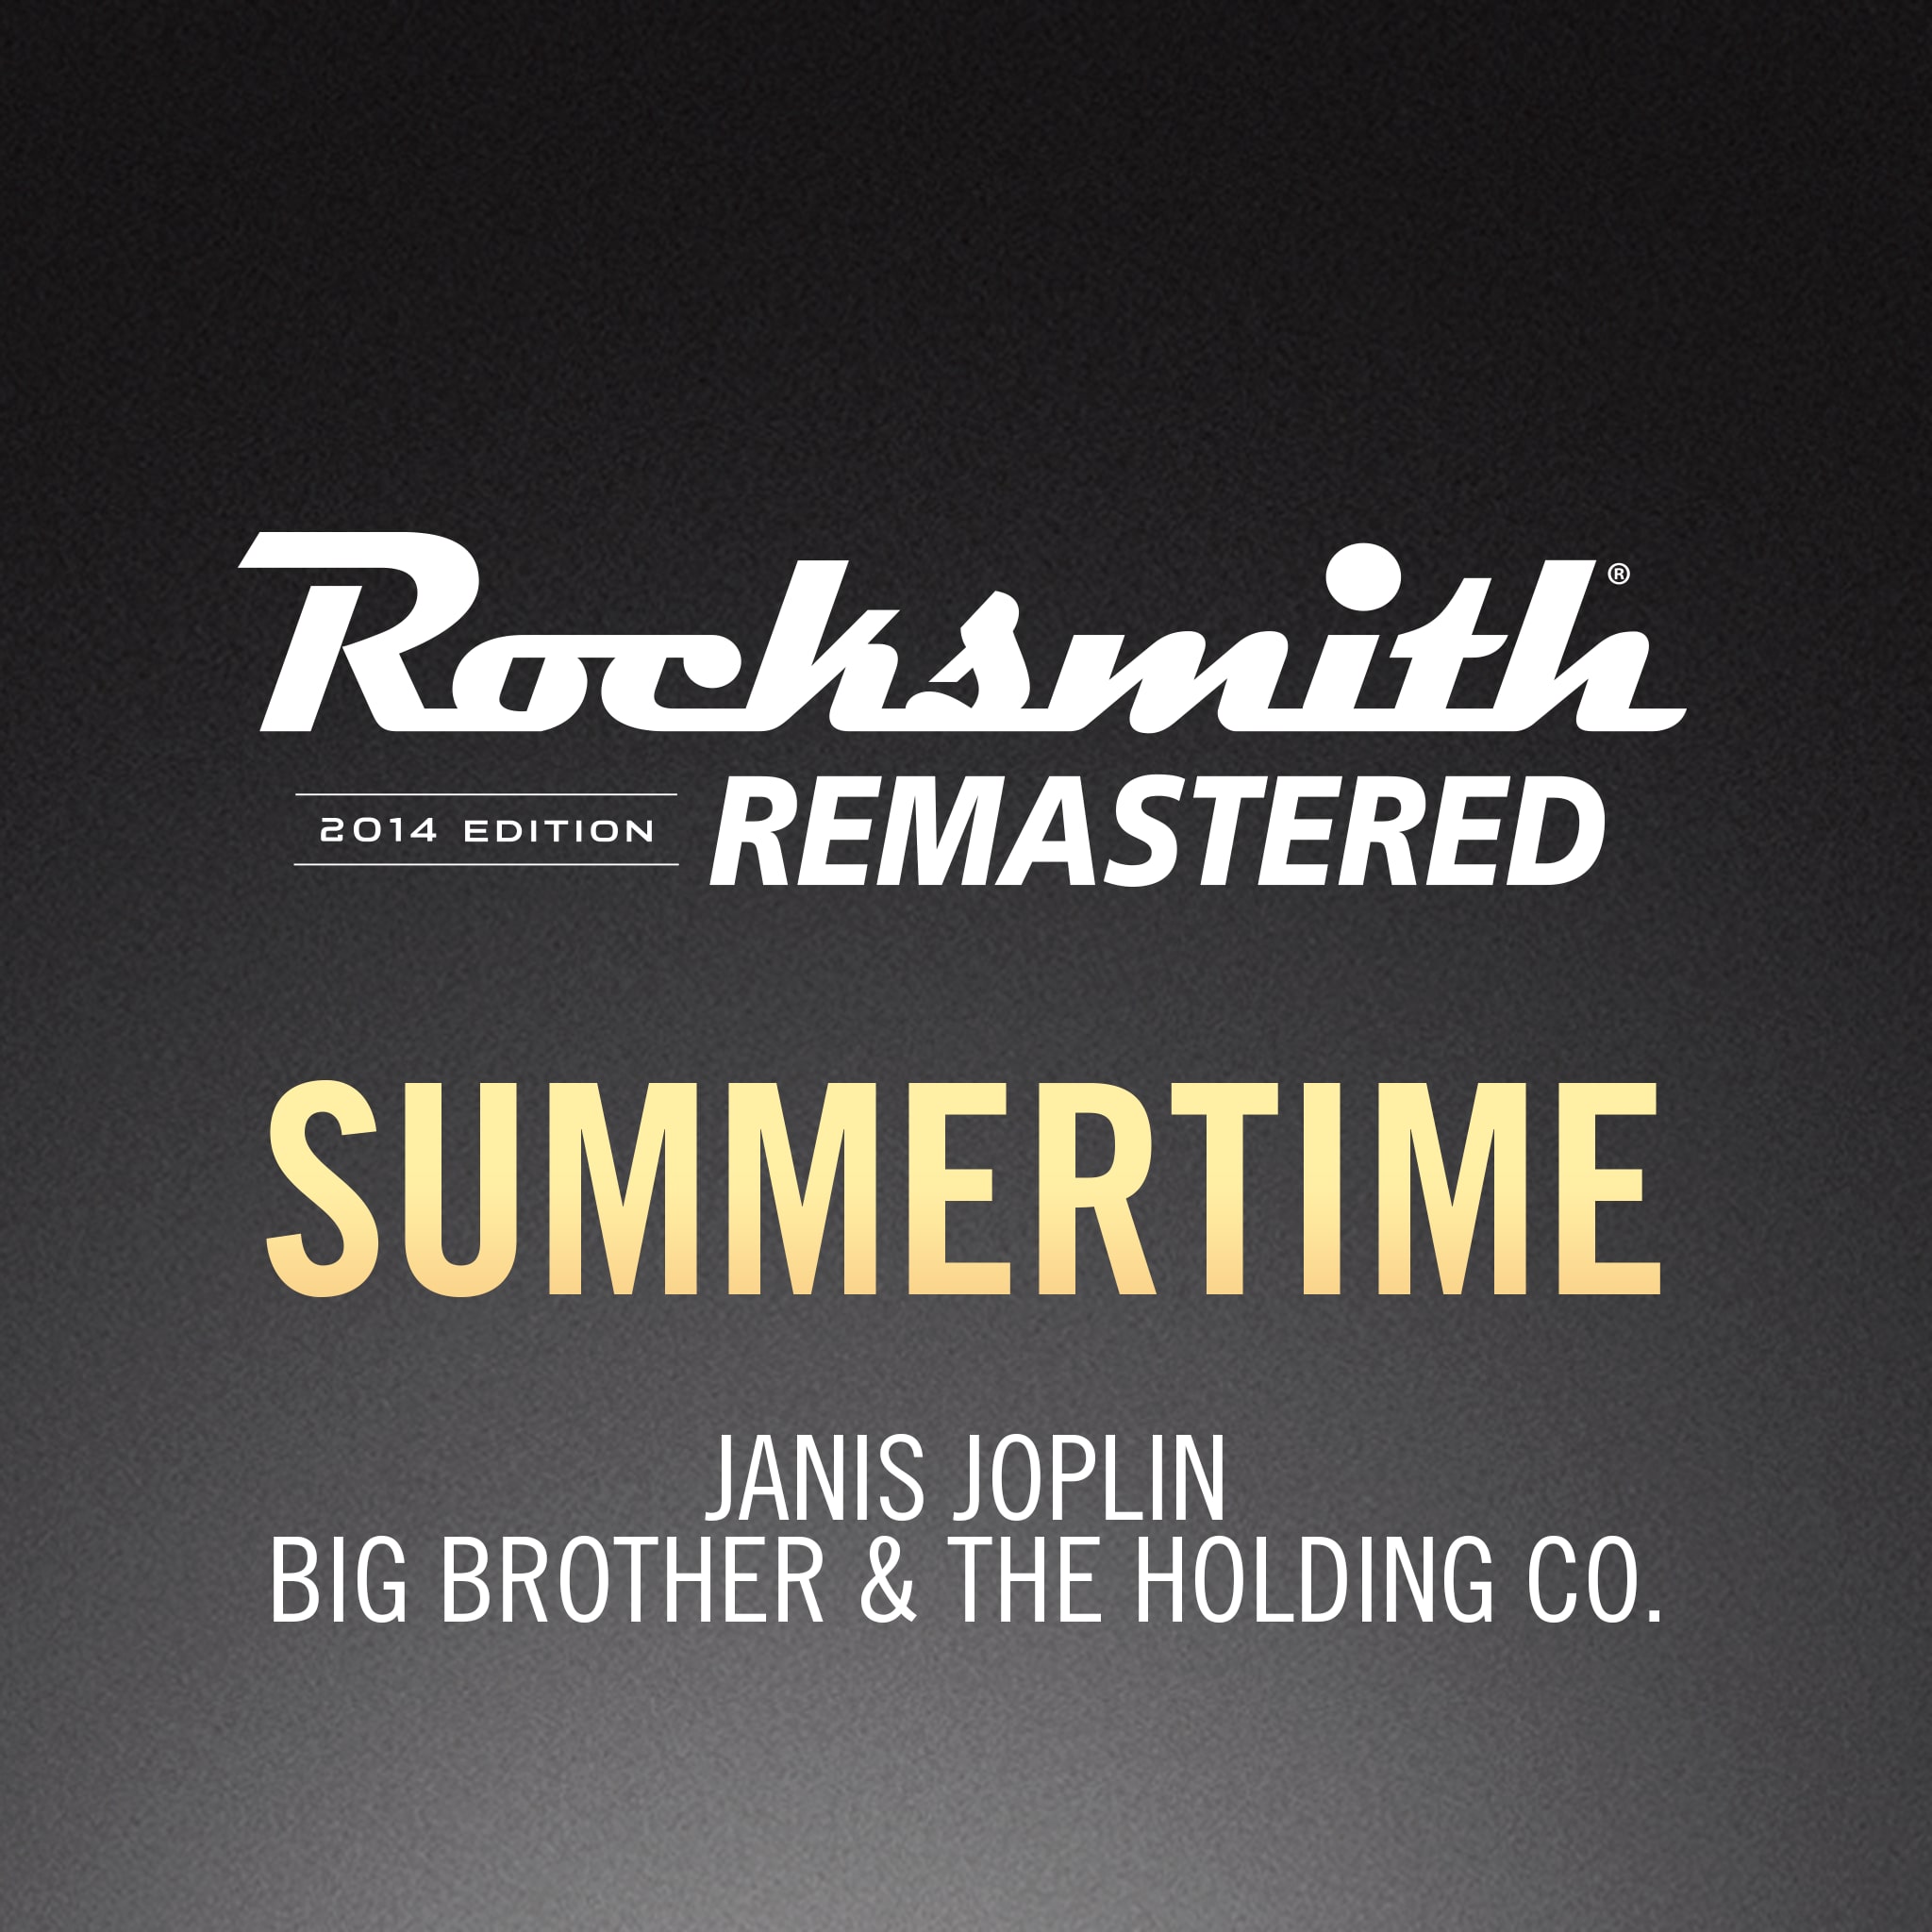 Janis Joplin/Big Brother & The Holding Co. - Summertime